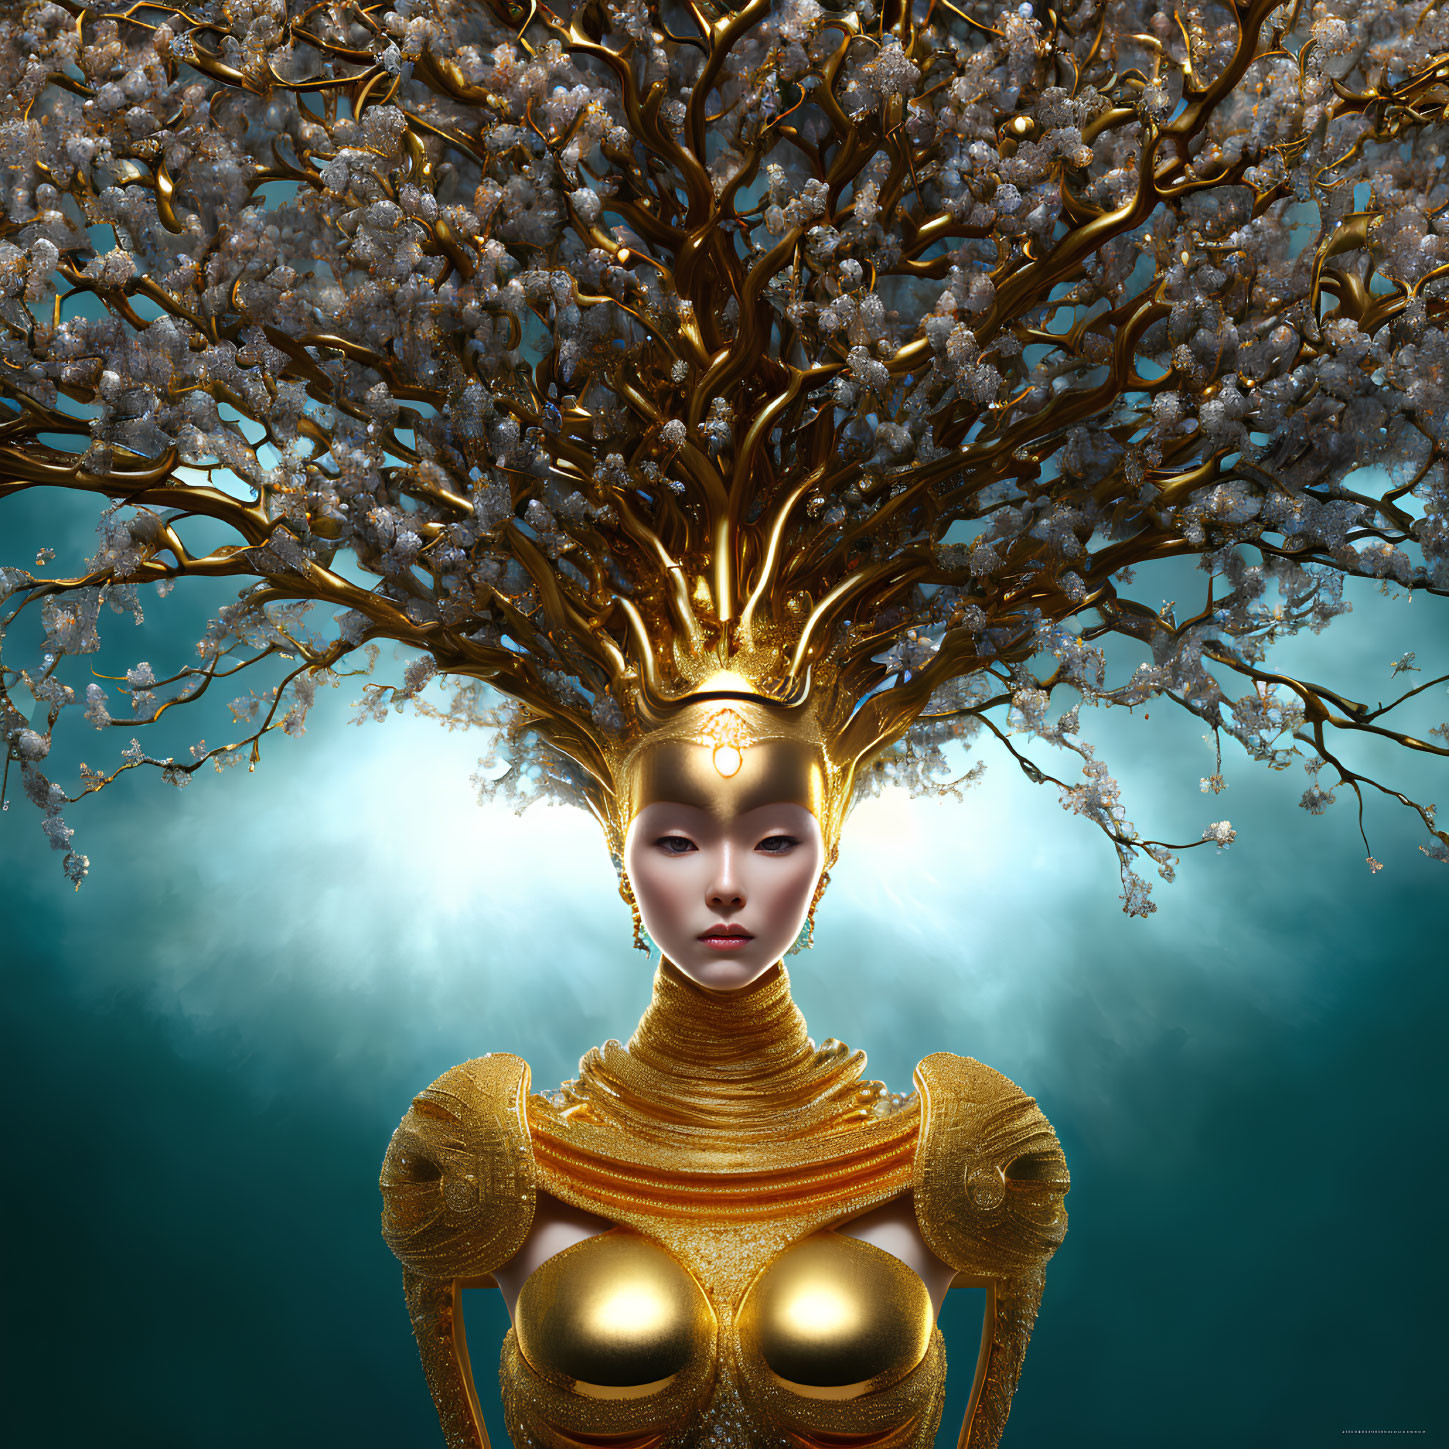 Woman with Golden Tree Crown and Armor on Teal Background